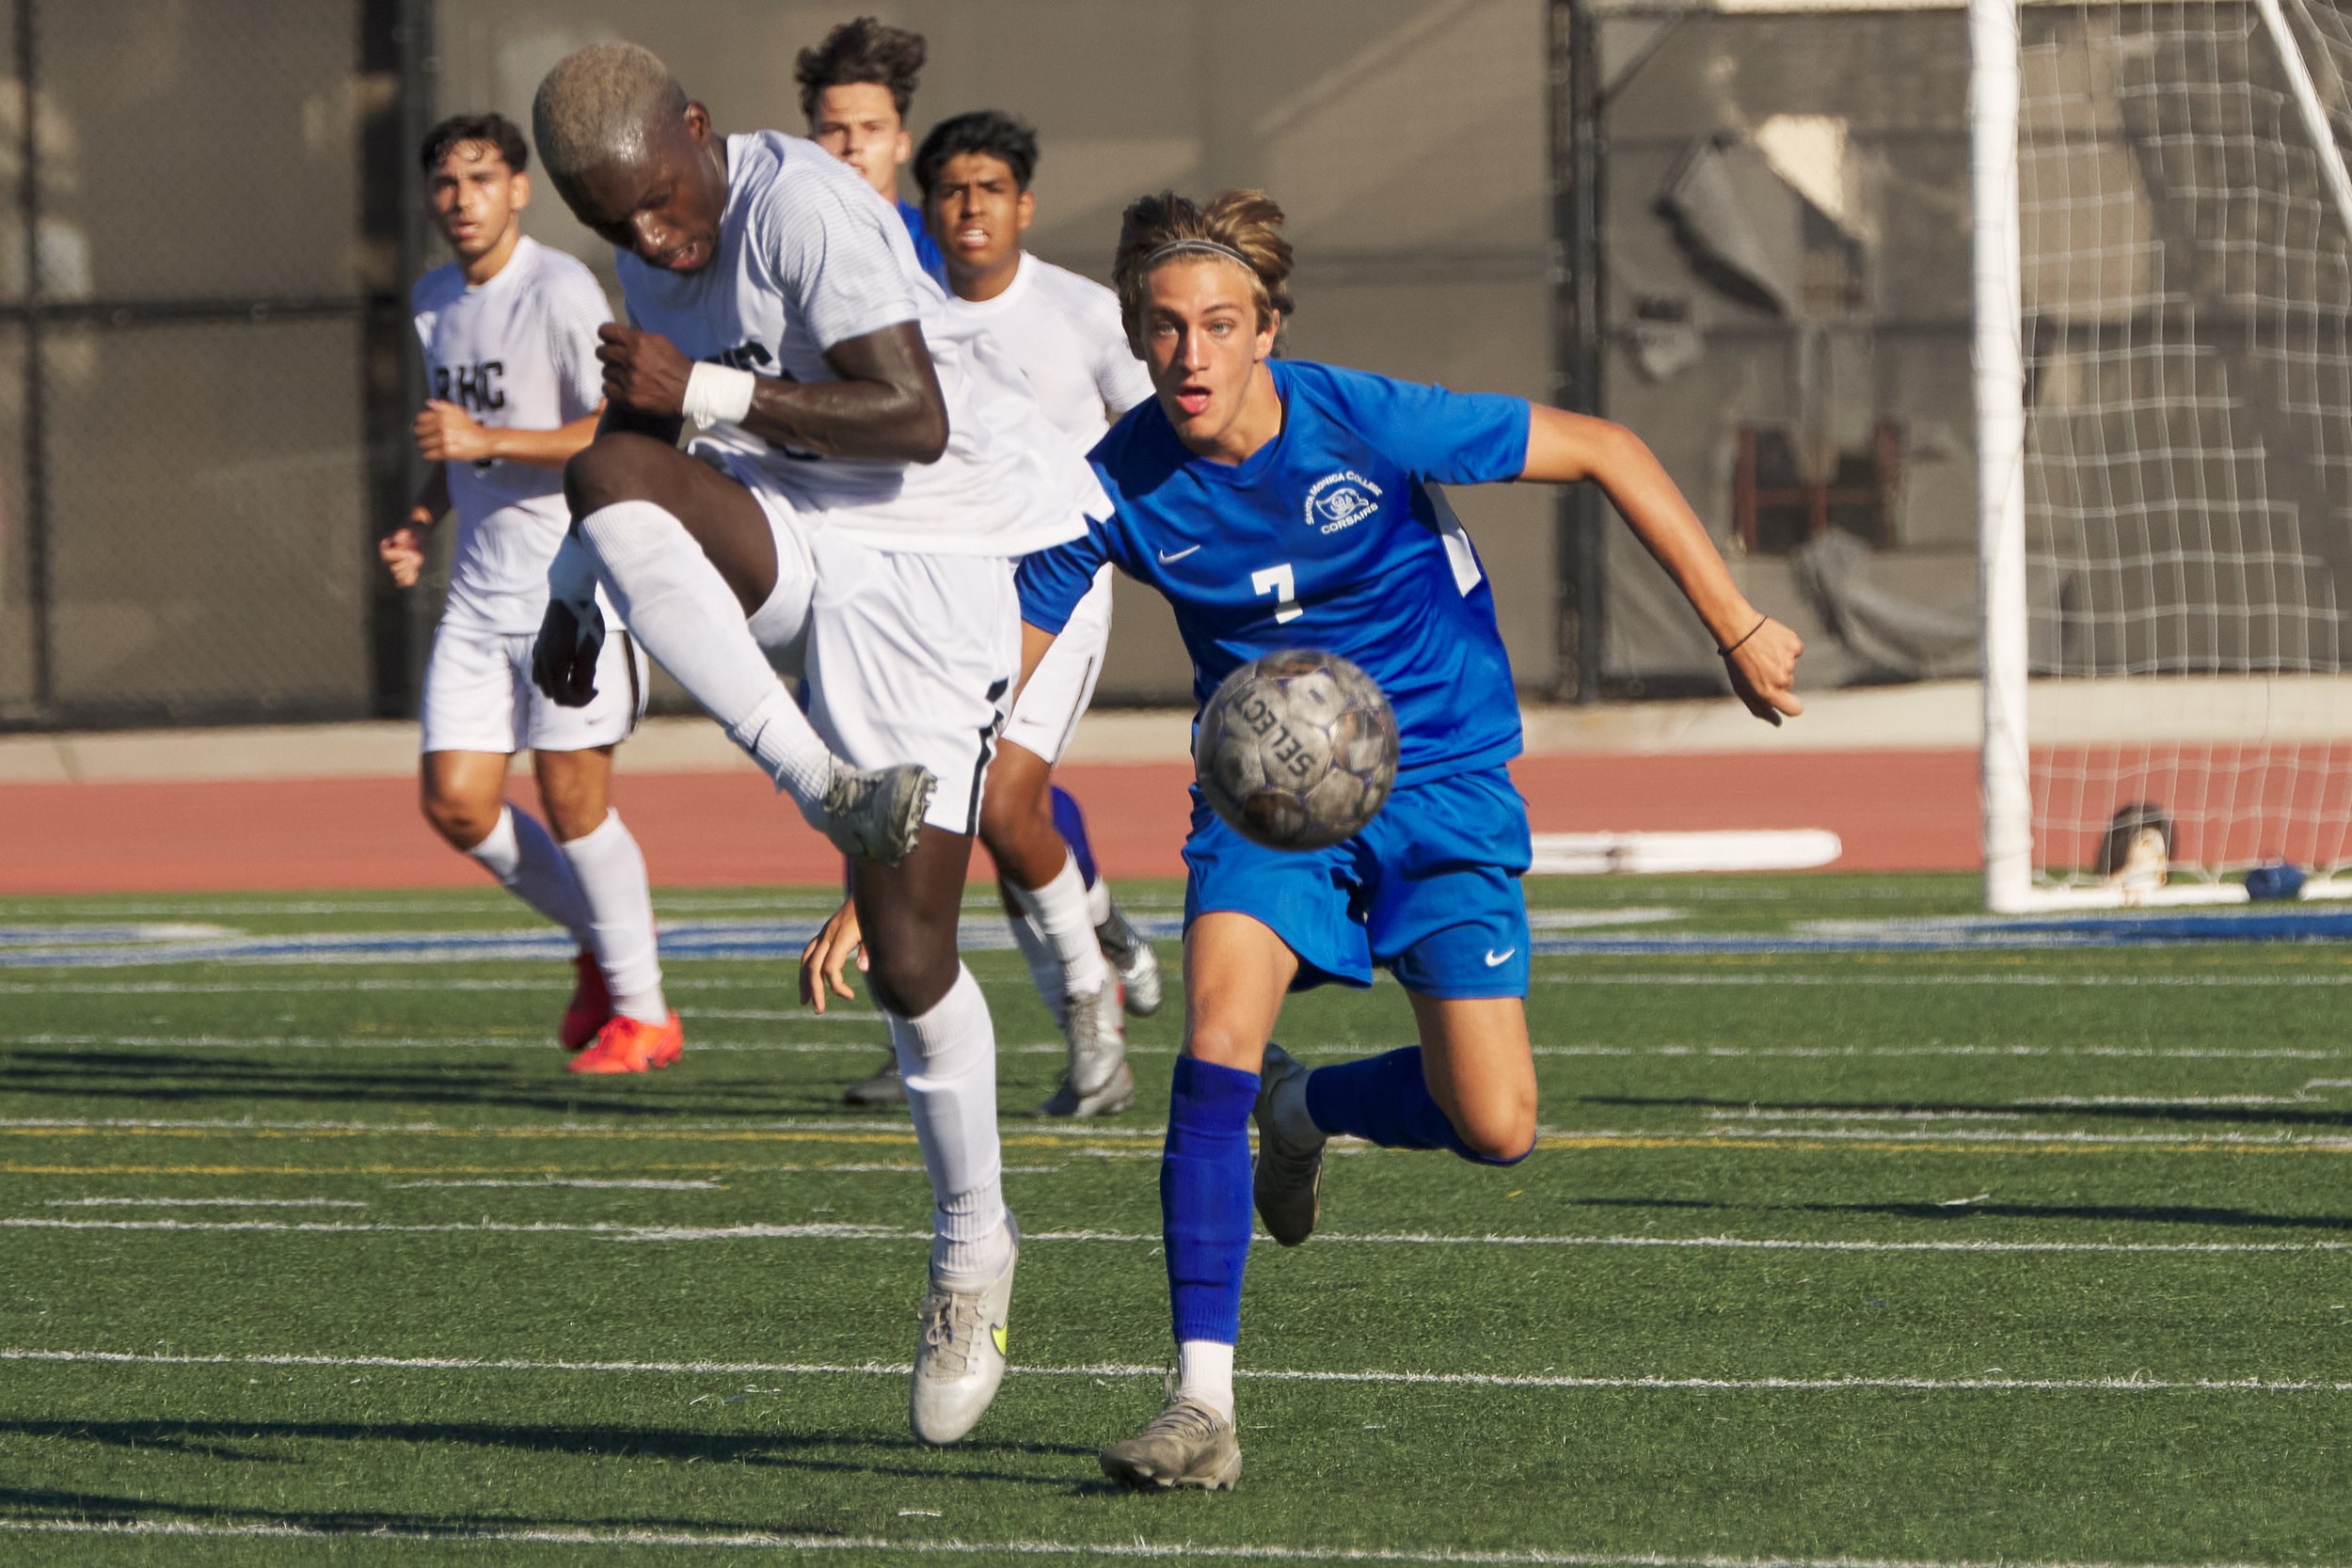  Santa Monica College Corsairs' Darren Lewis (right) and Rio Hondo College Roadrunners' Ebenezer Chinne (front) during the men's soccer match on Friday, Sept. 24, 2022, at Corsair Field in Santa Monica, Calif. The Corsairs won 2-1. (Nicholas McCall |